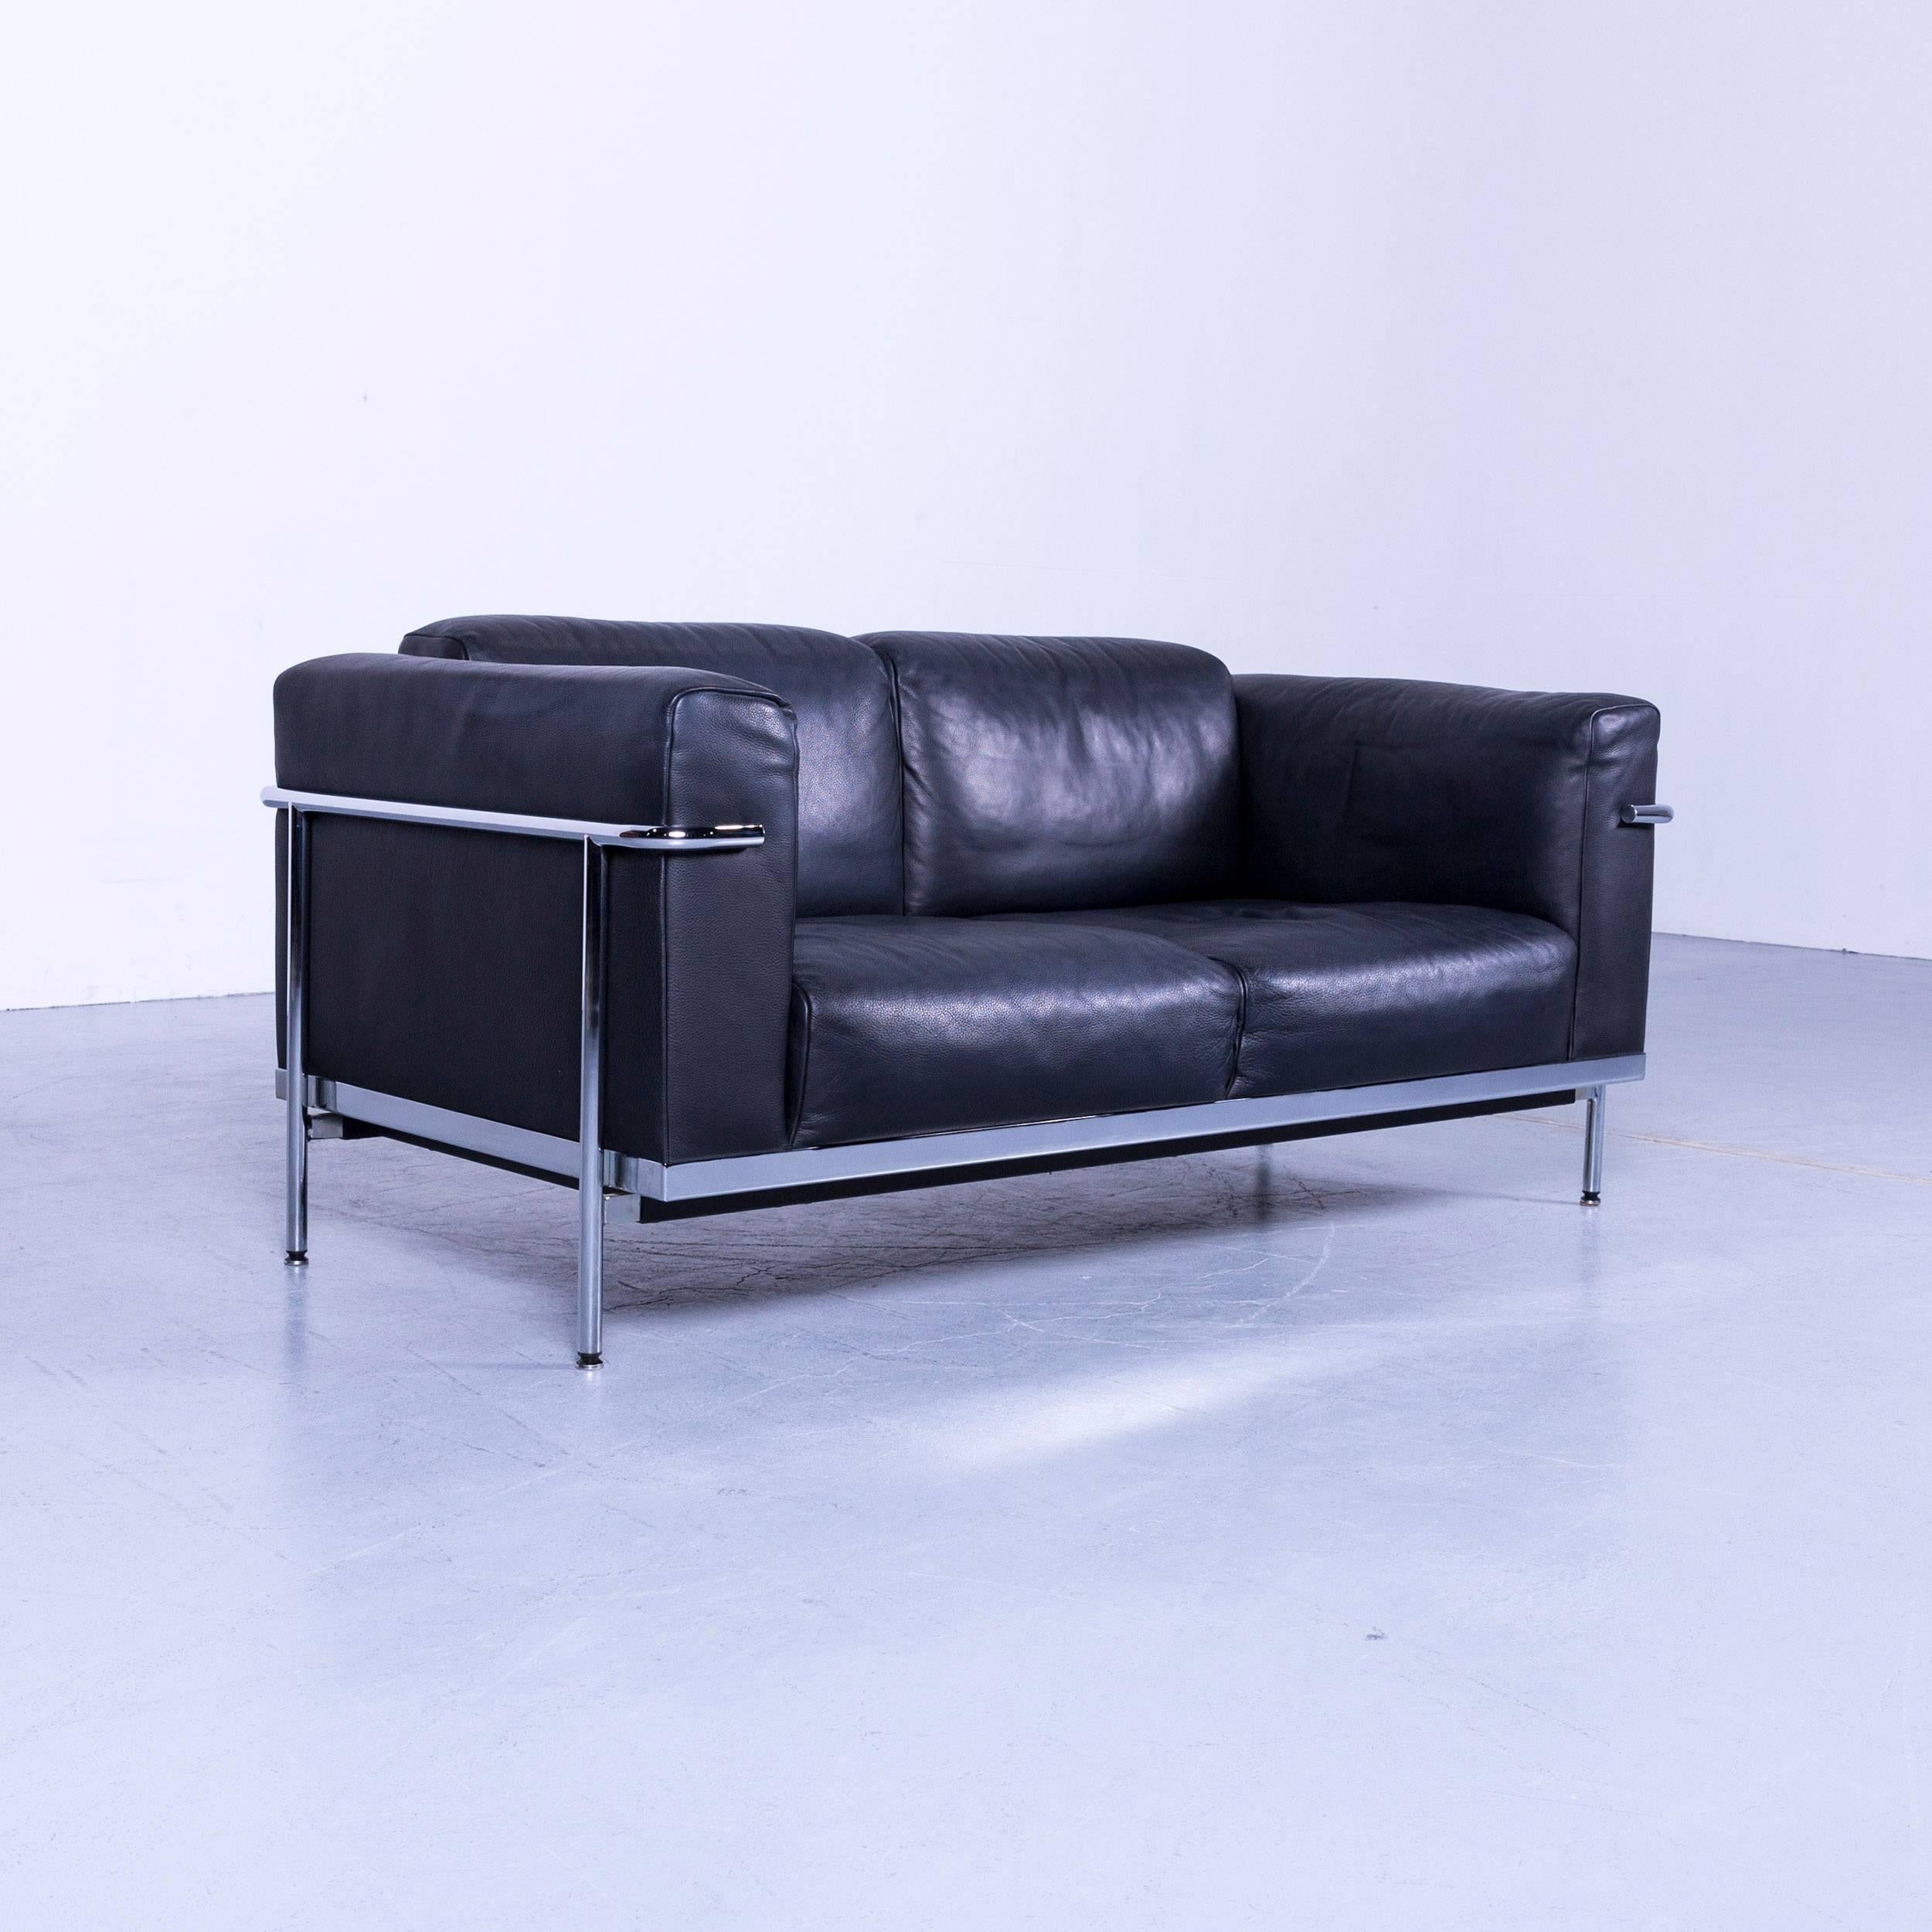 Black colored original De Sede DS 560 designer leather sofa in a minimalistic and modern design, made for pure comfort and flexibility.